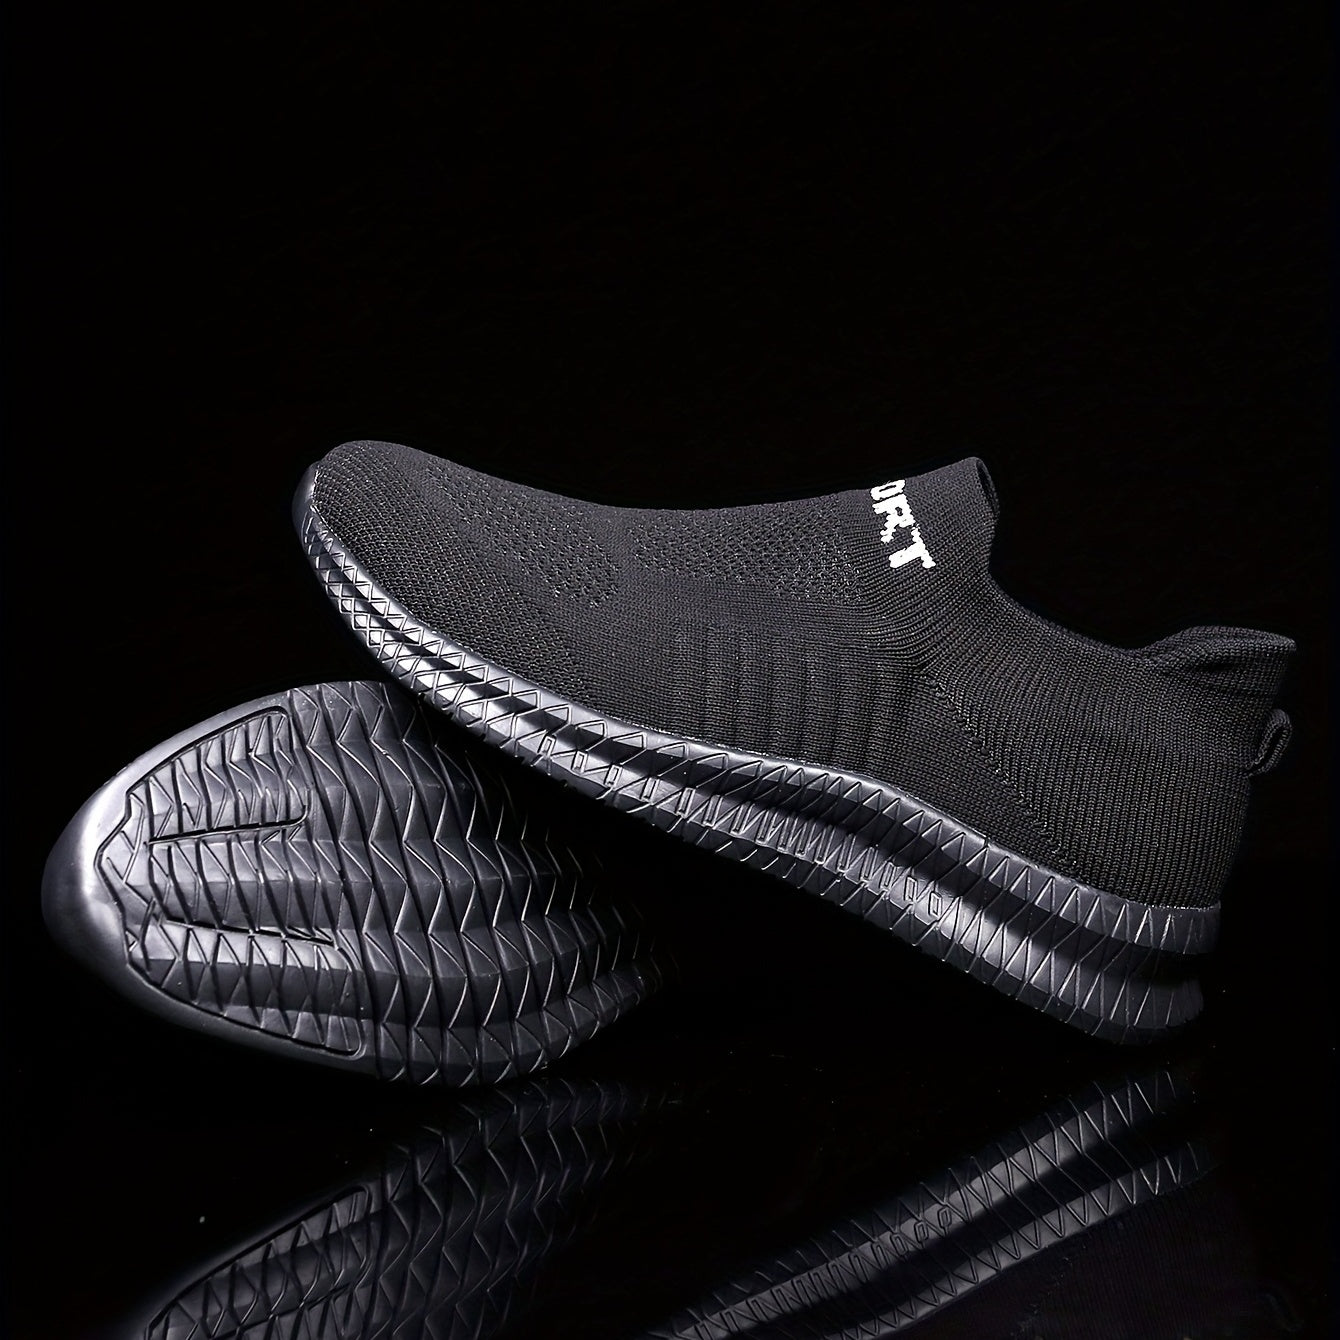 Knit Breathable Slip On Running Shoes, Comfy Sneaker